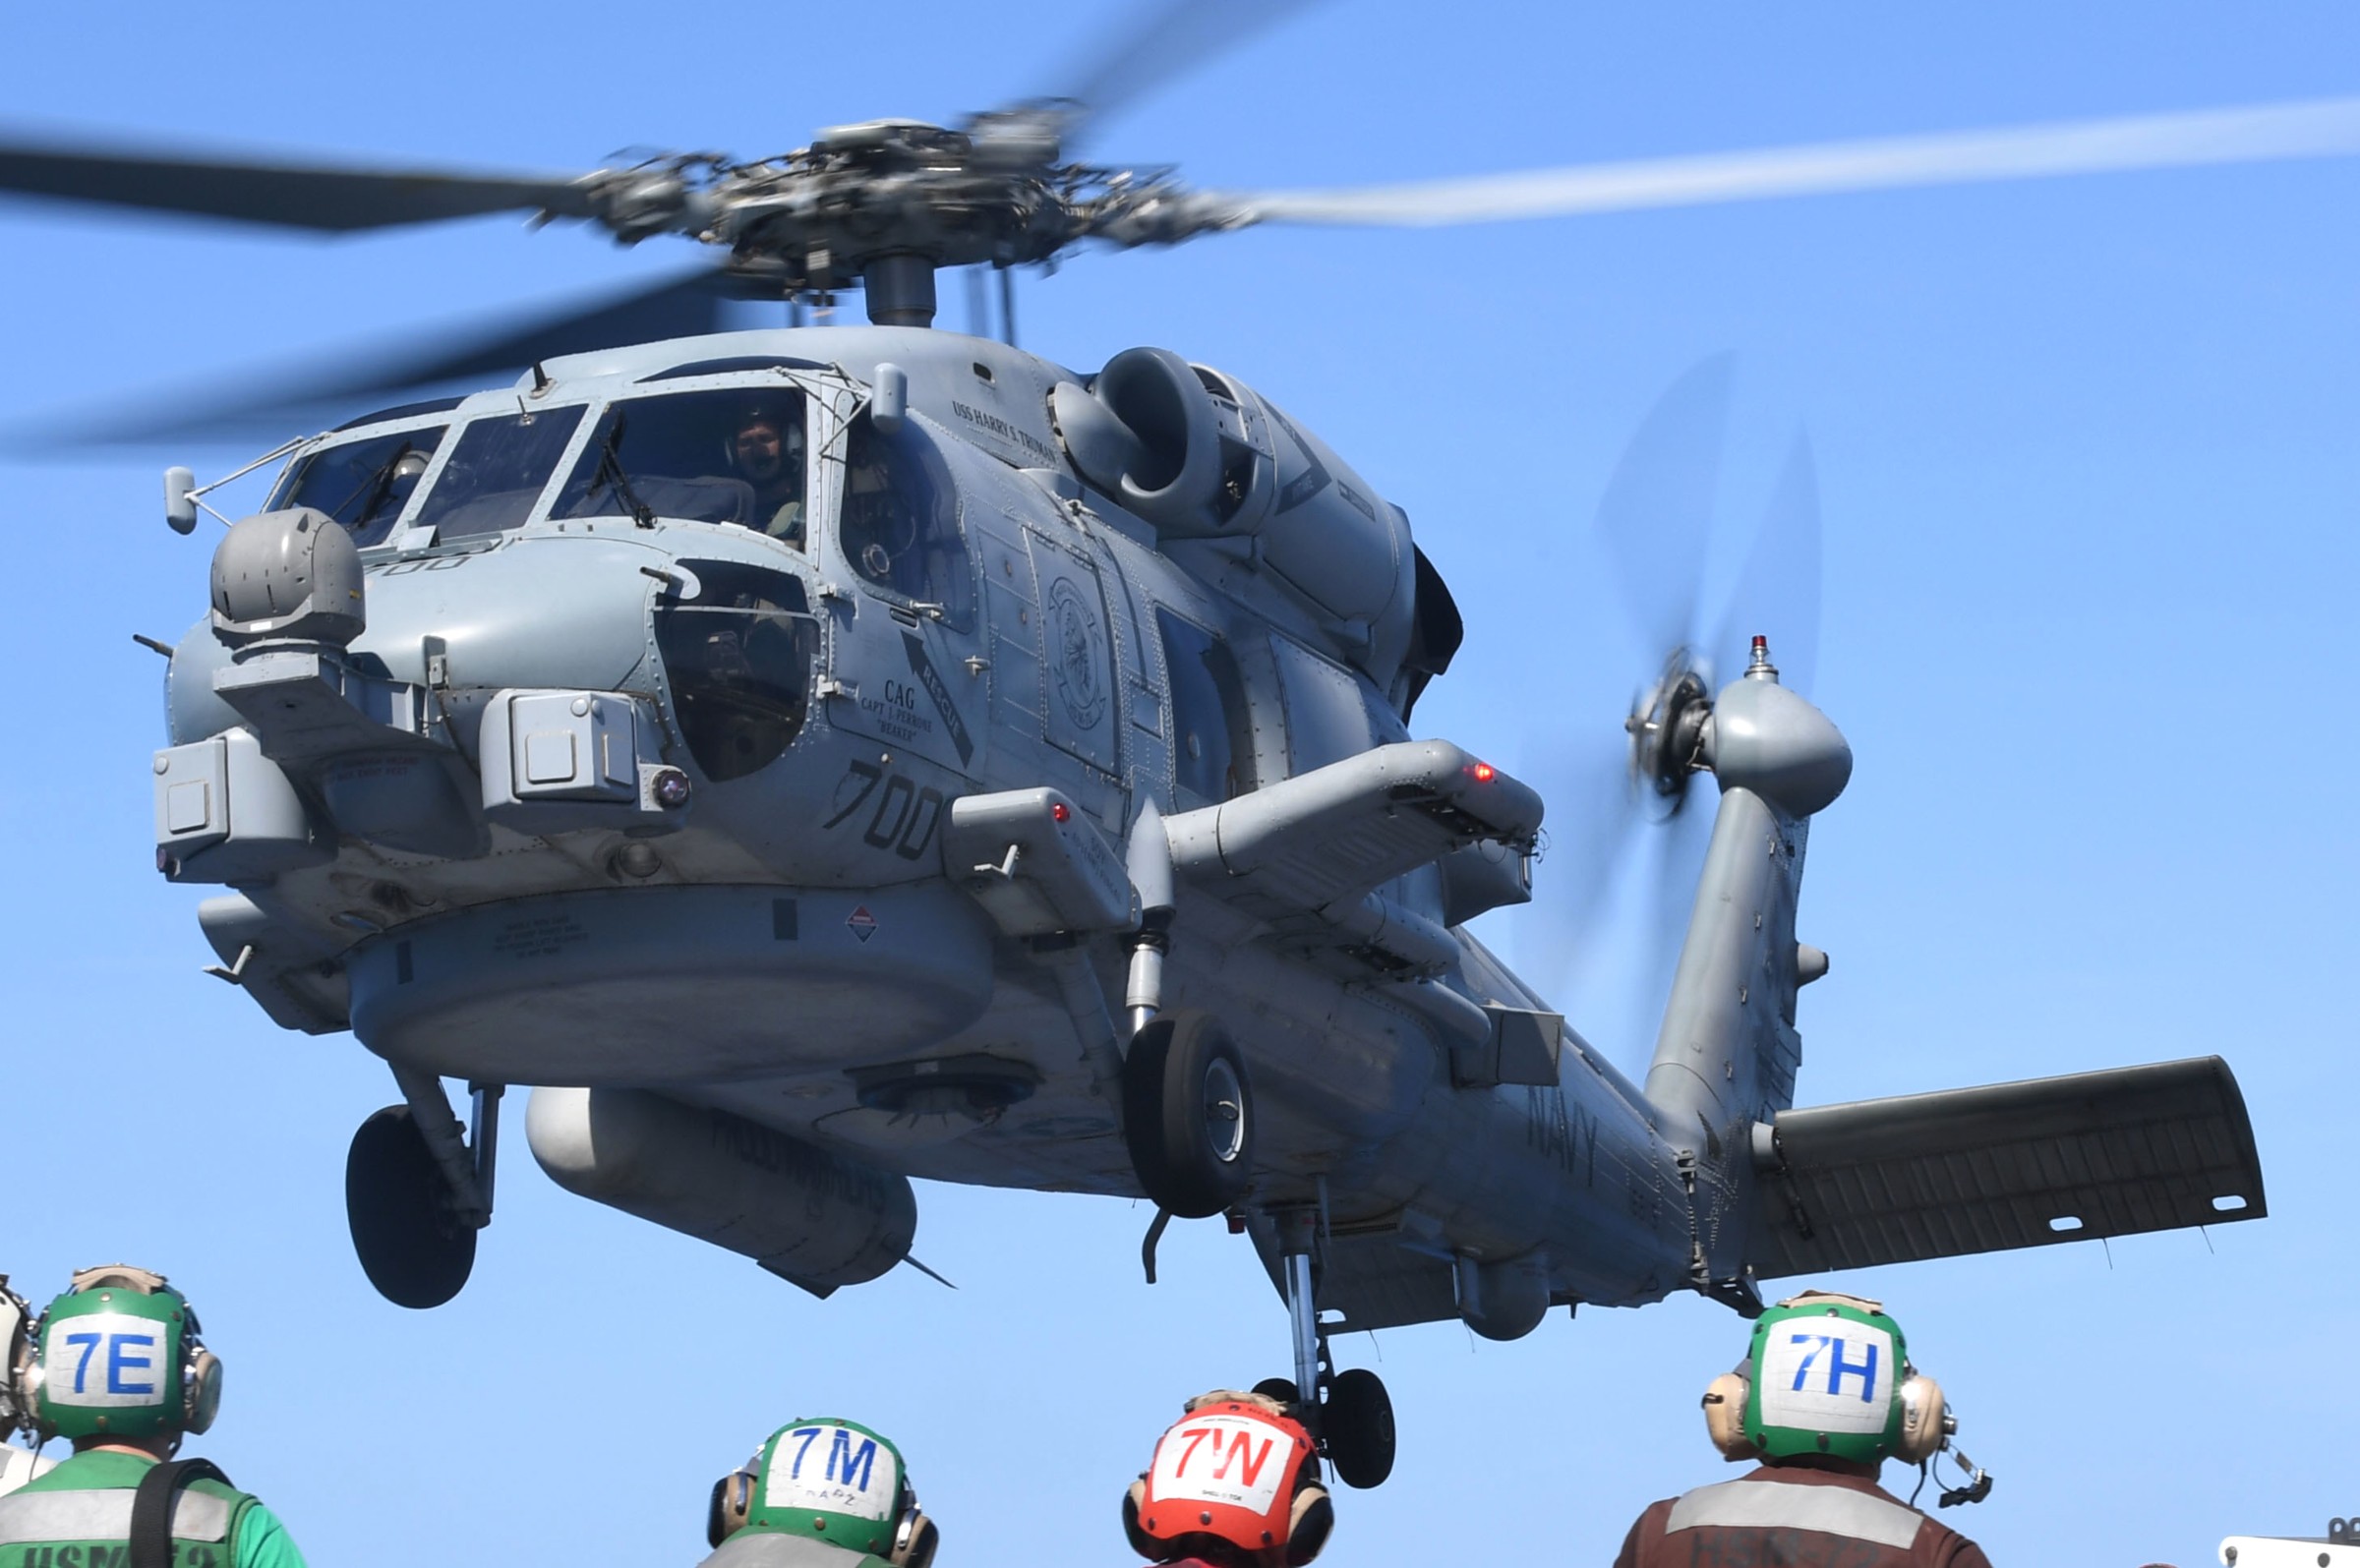 hsm-72 proud warriors helicopter maritime strike squadron us navy mh-60r seahawk 2014 35